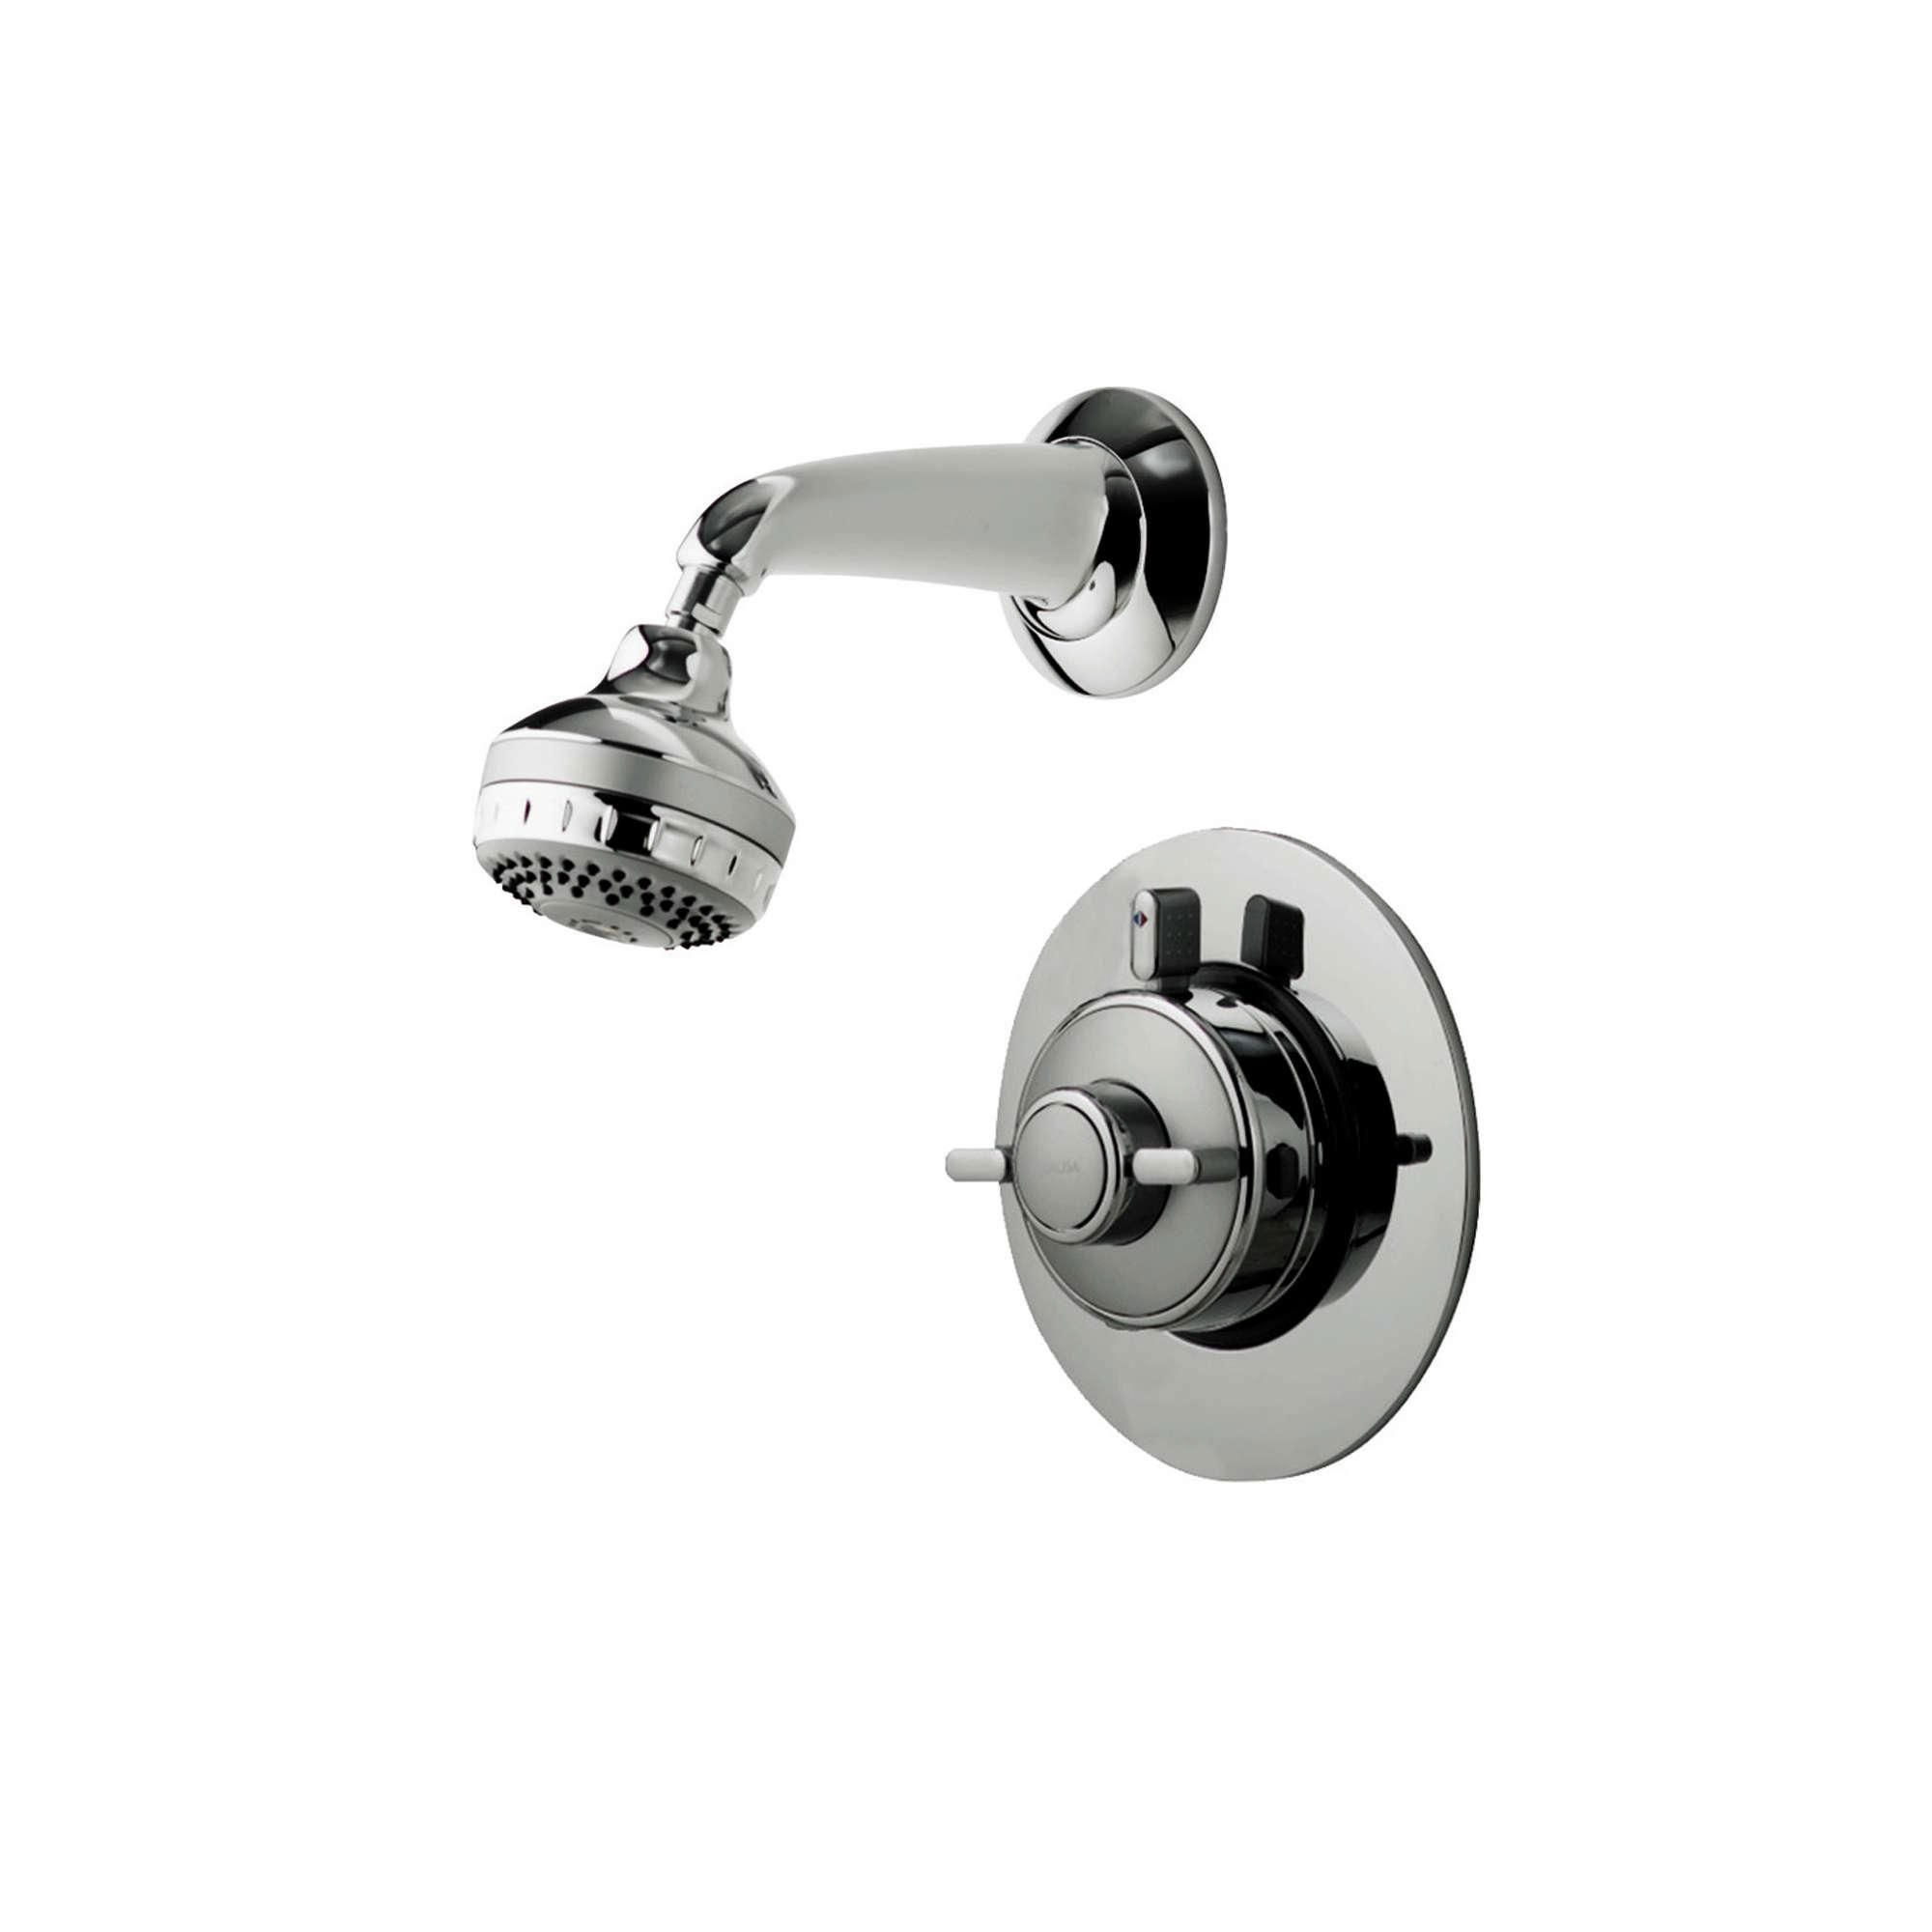 Aqualisa Quartz Thermo Concealed Shower with Fixed Head Kit at Tesco Direct